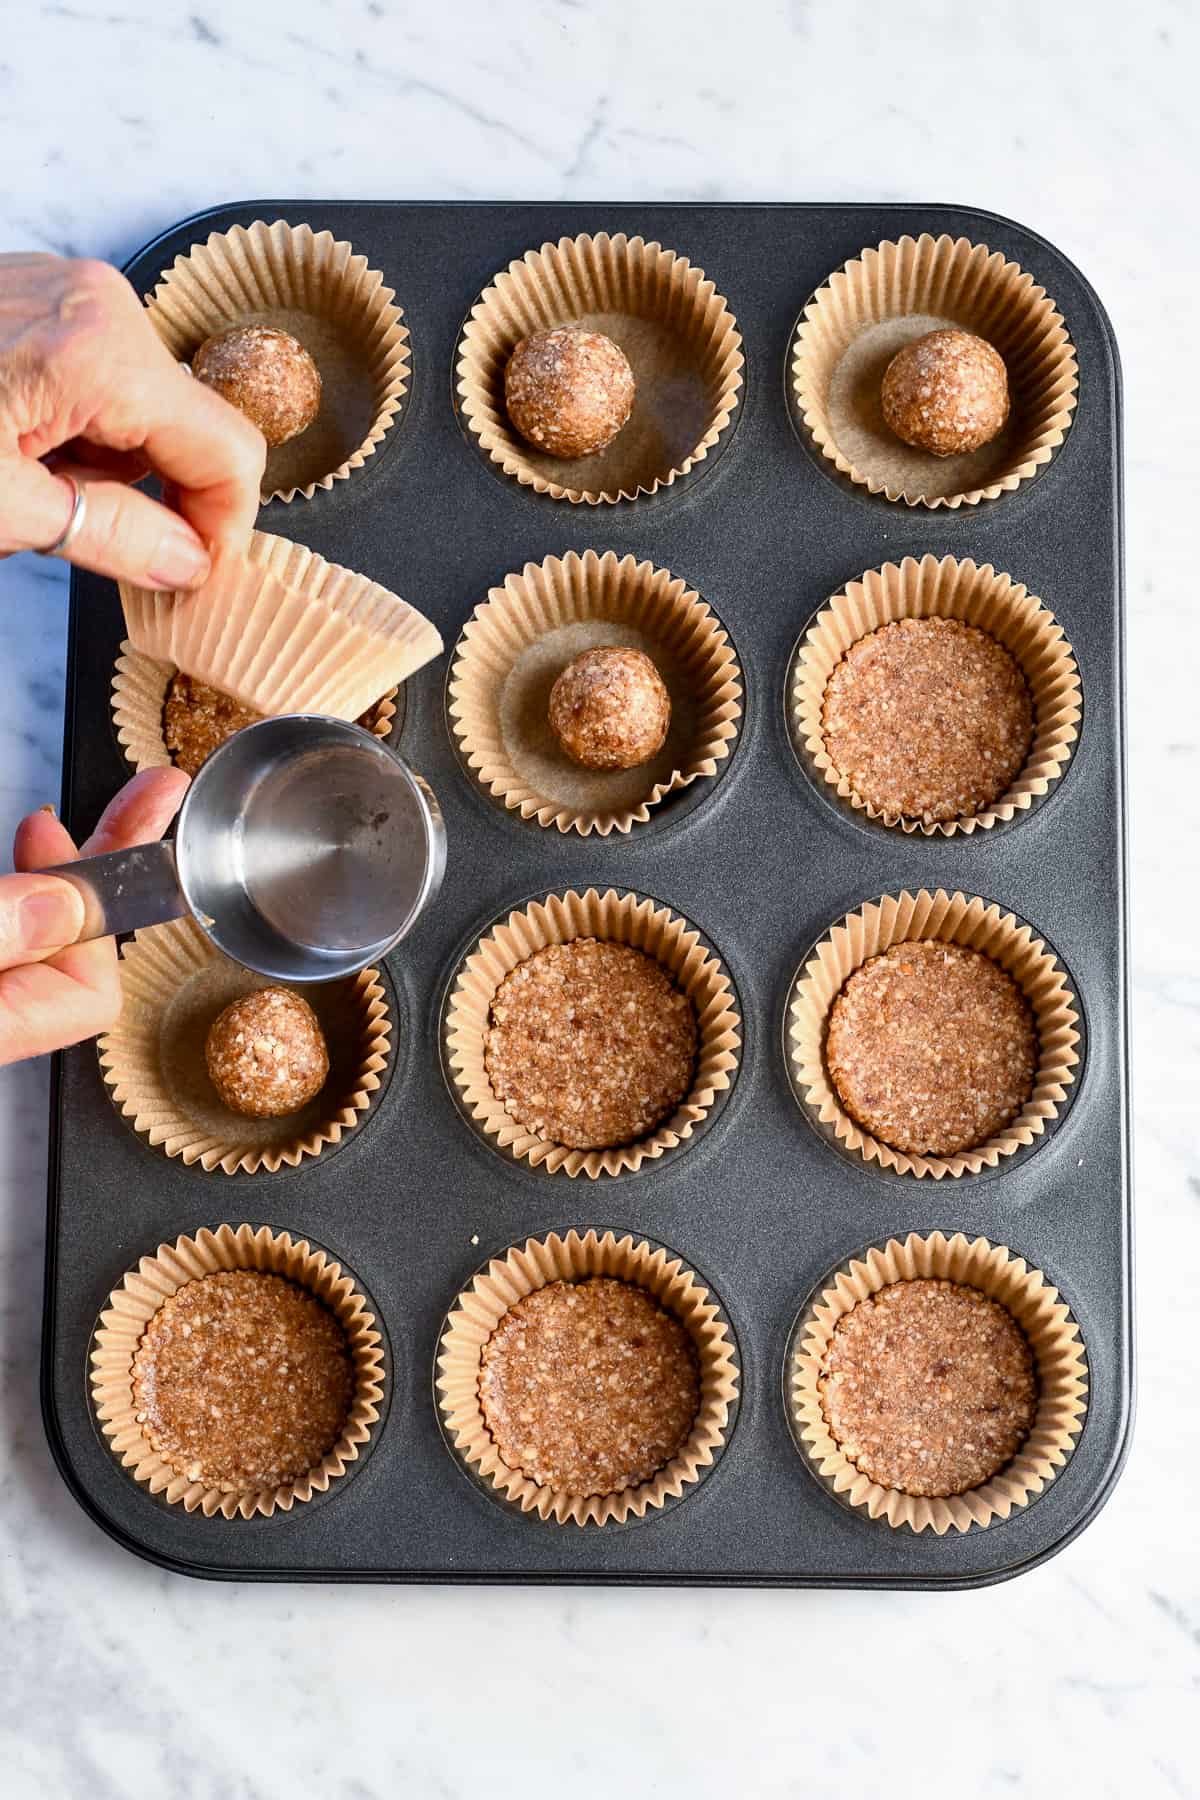 Almond coconut crust in cupcake pan with hands showing how to press the crust into the cupcake liners